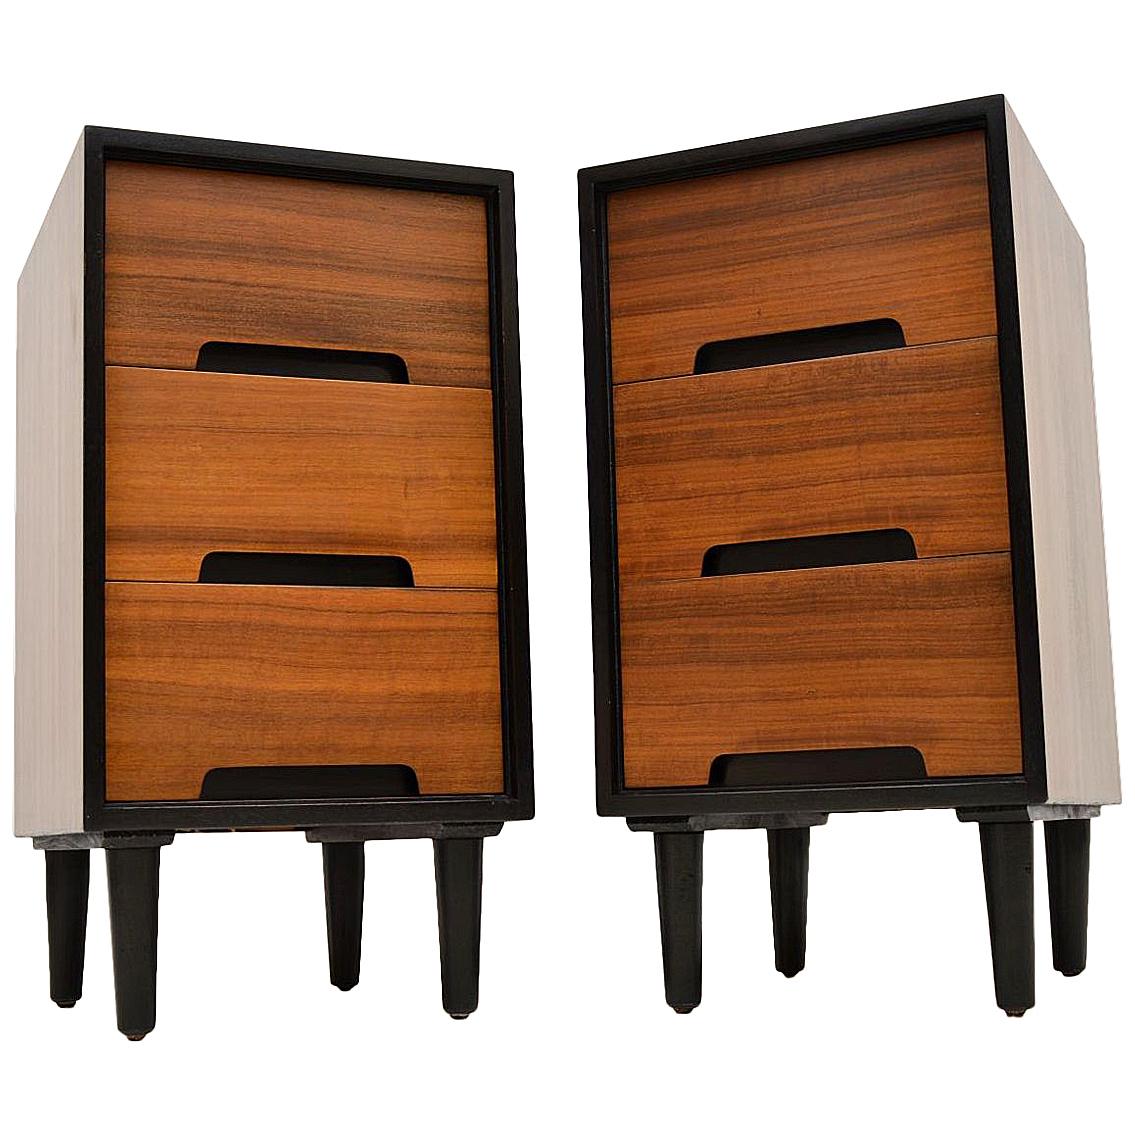 1950s Pair of Walnut Bedside Chests by John & Sylvia Reid for Stag